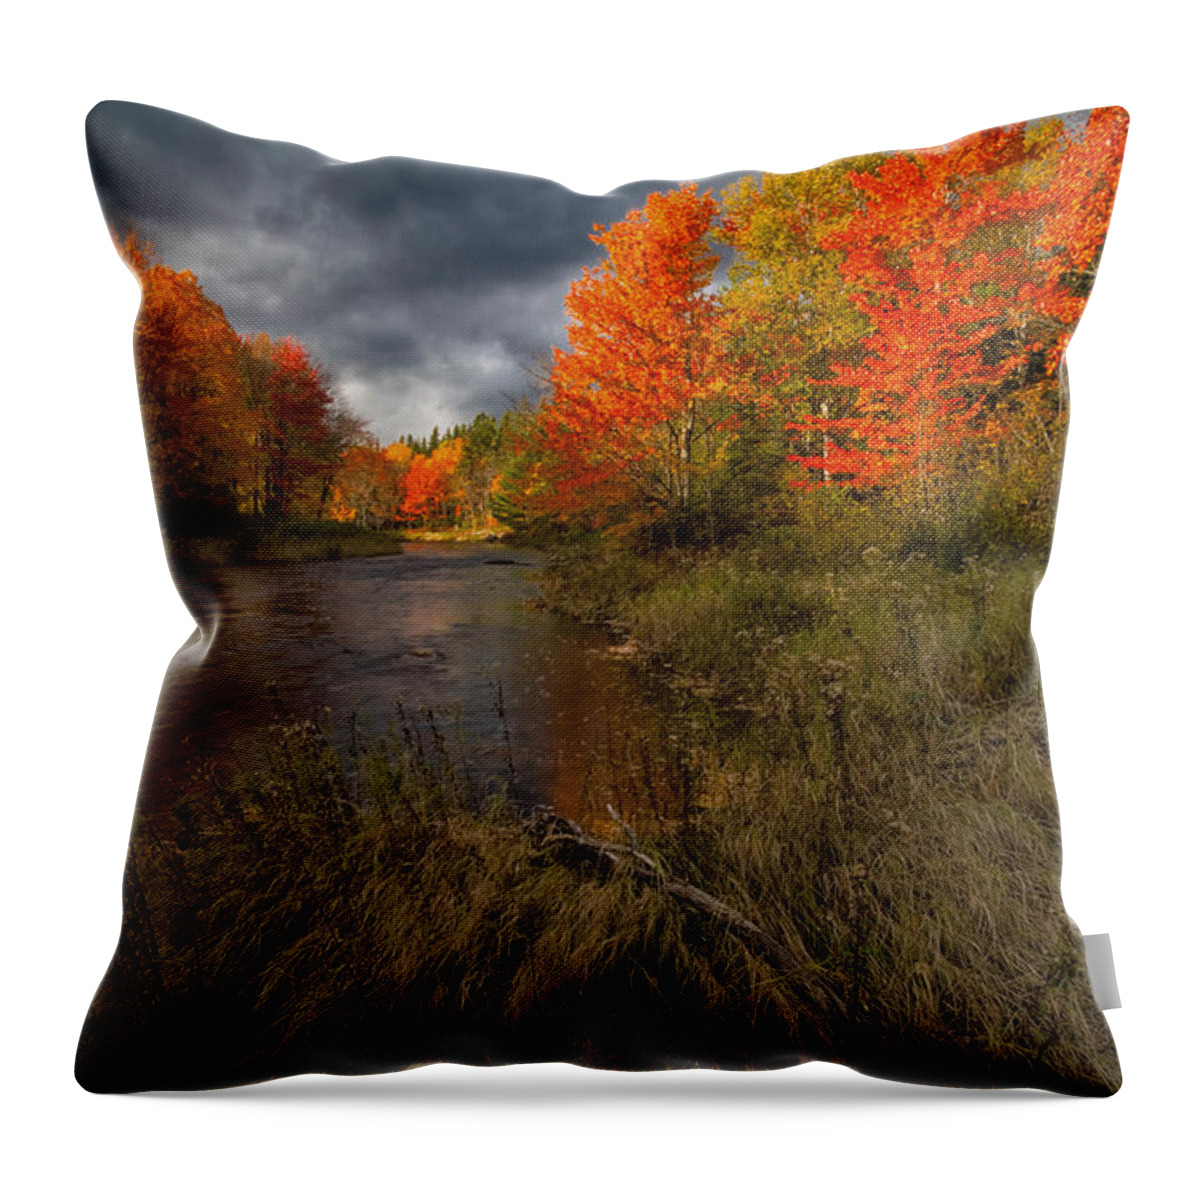 Kelly River Wilderness Area Throw Pillow featuring the photograph Driftwood And Autumn Colors by Irwin Barrett